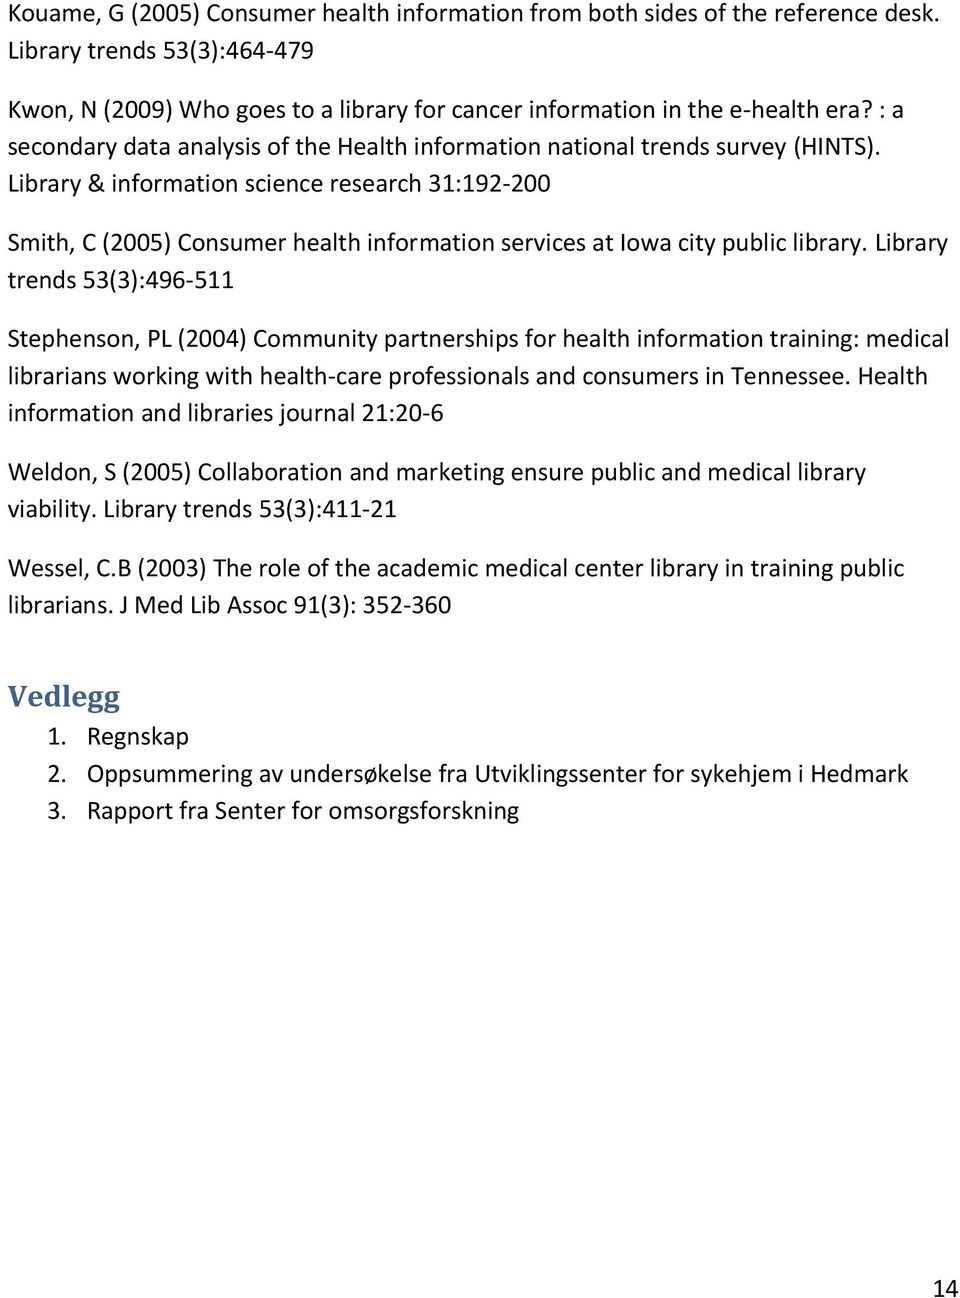 Library & information science research 31:192-200 Smith, C (2005) Consumer health information services at Iowa city public library.